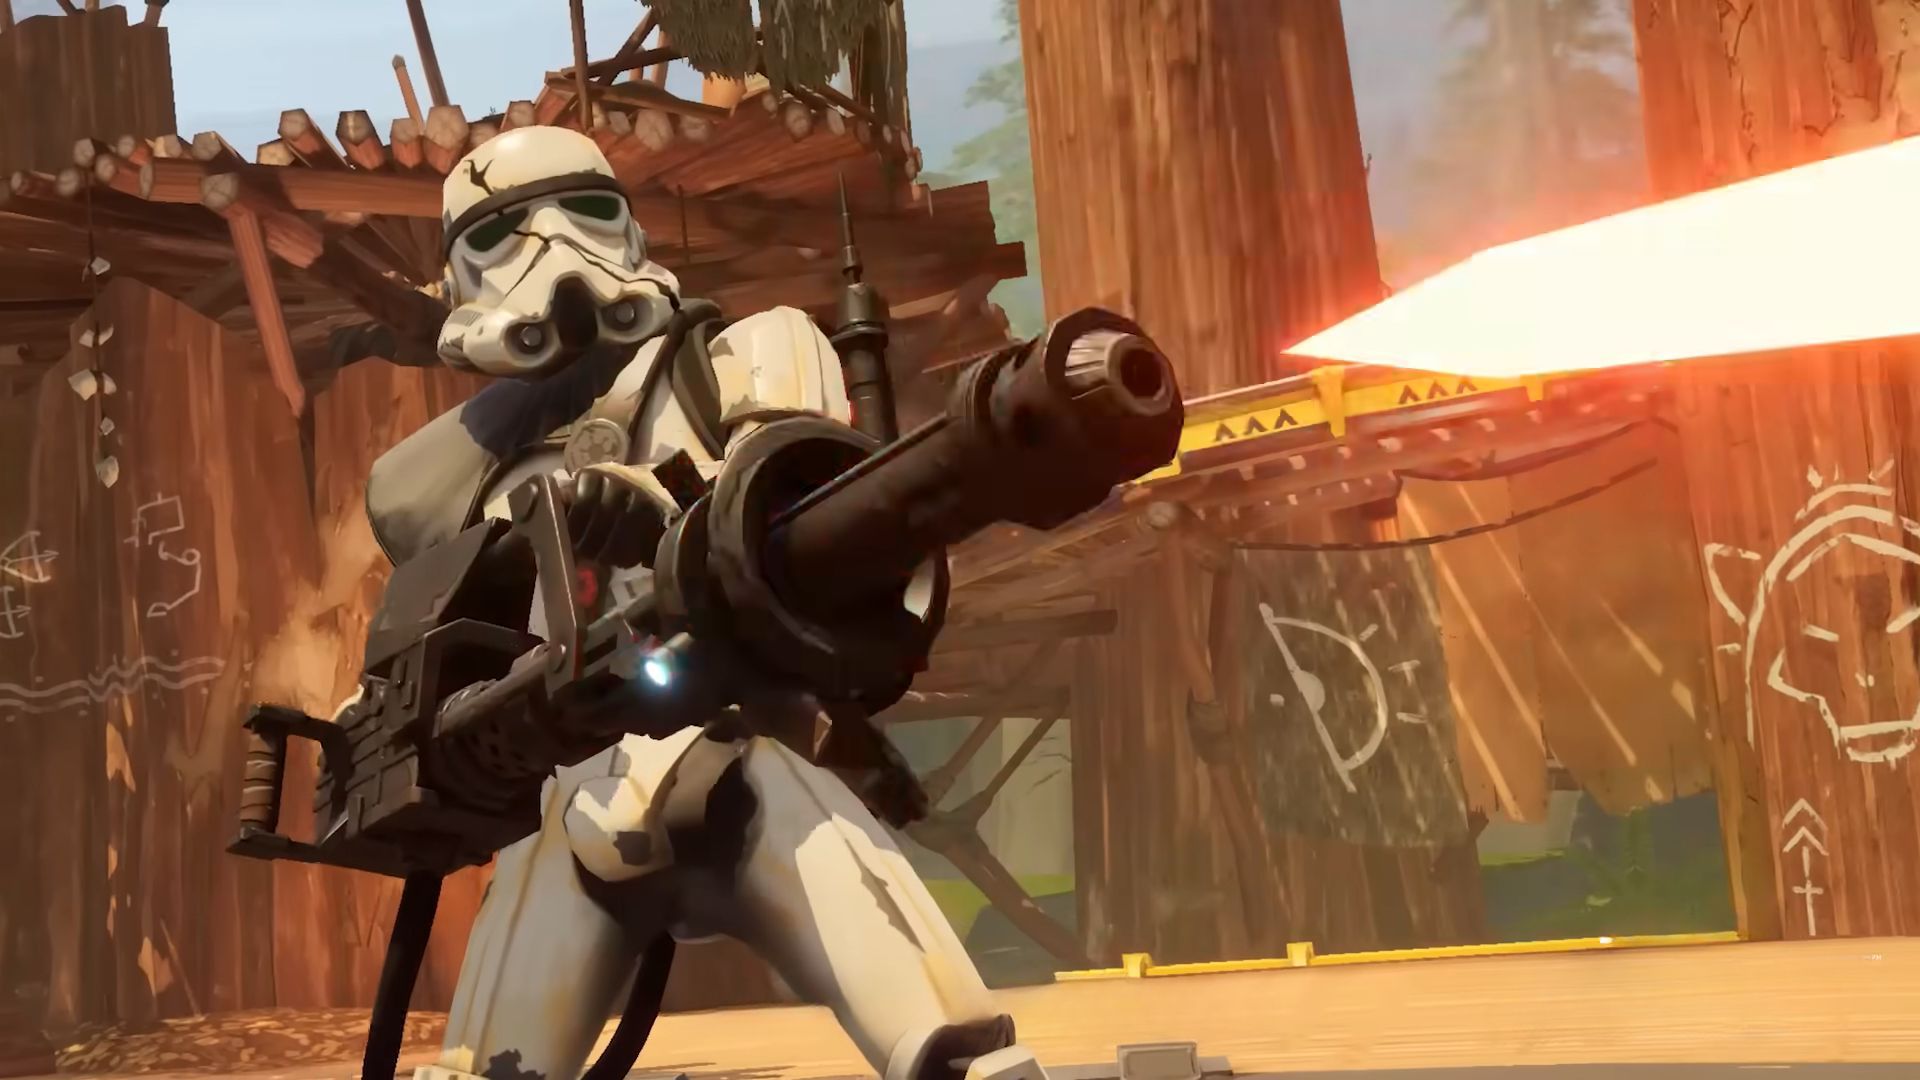 Sentinel firing his heavy weapon in the Ewok Village in Star Wars: Hunters